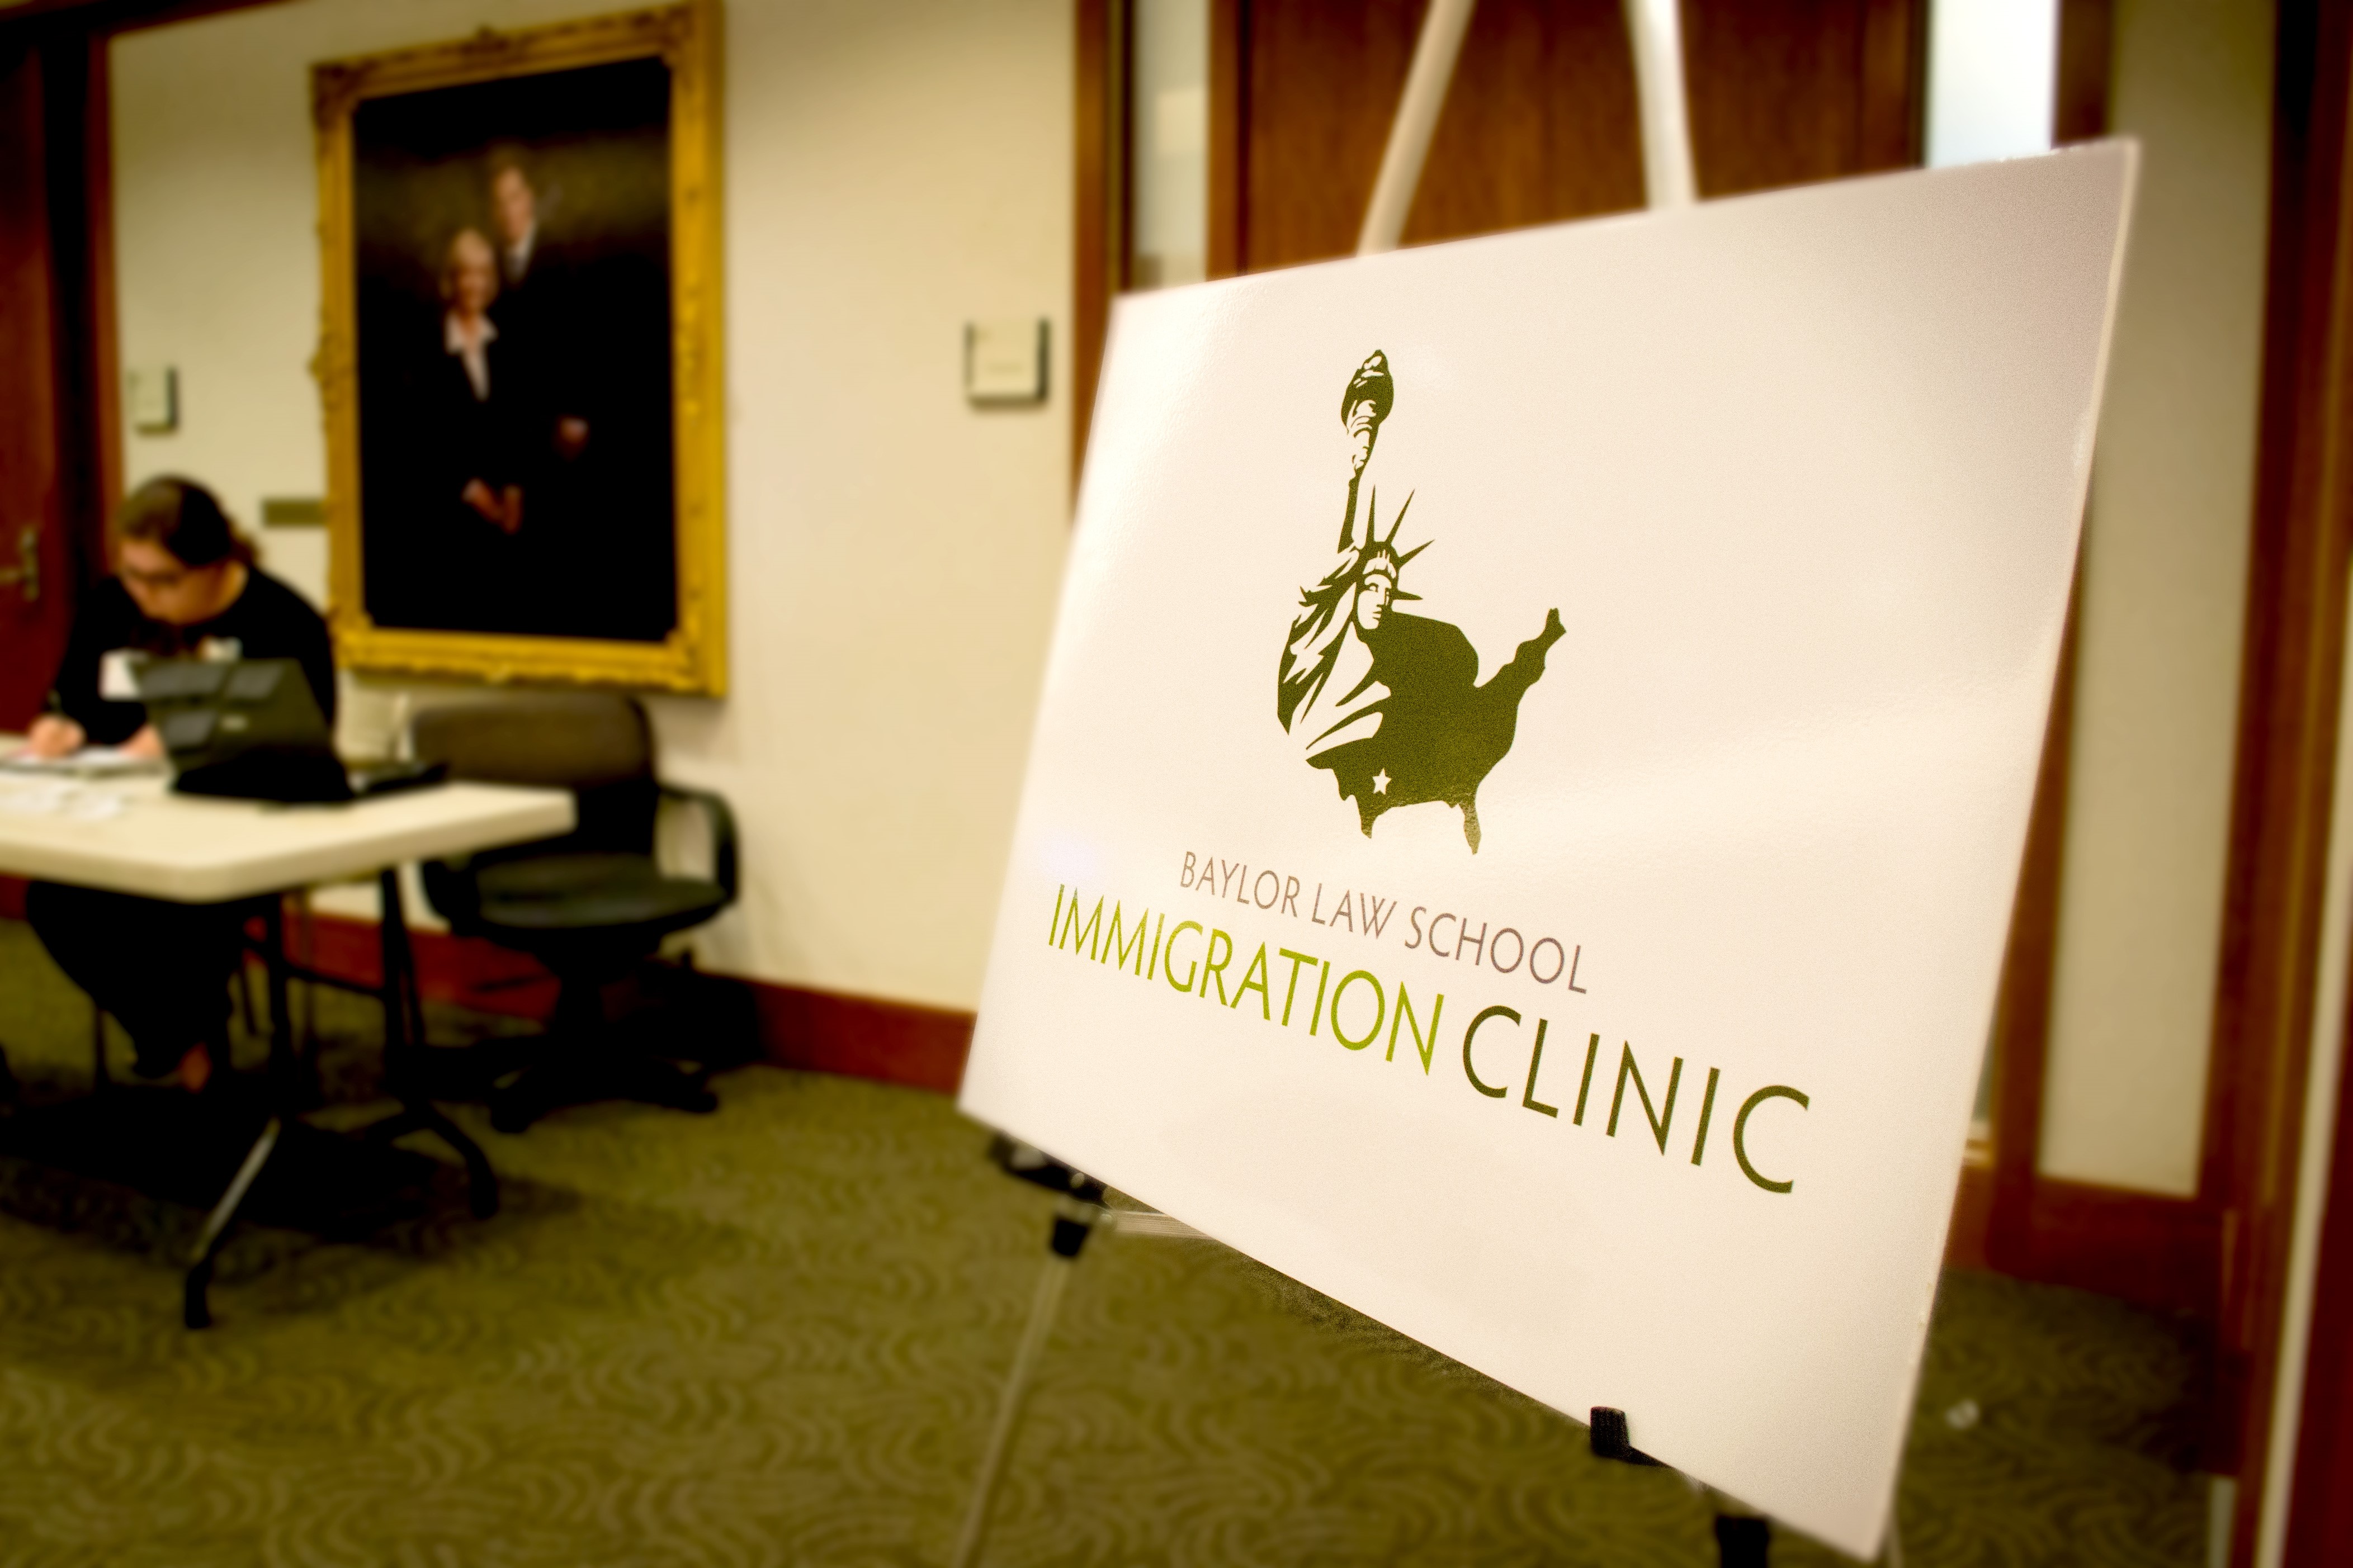 Patton Gift Immigration Clinic